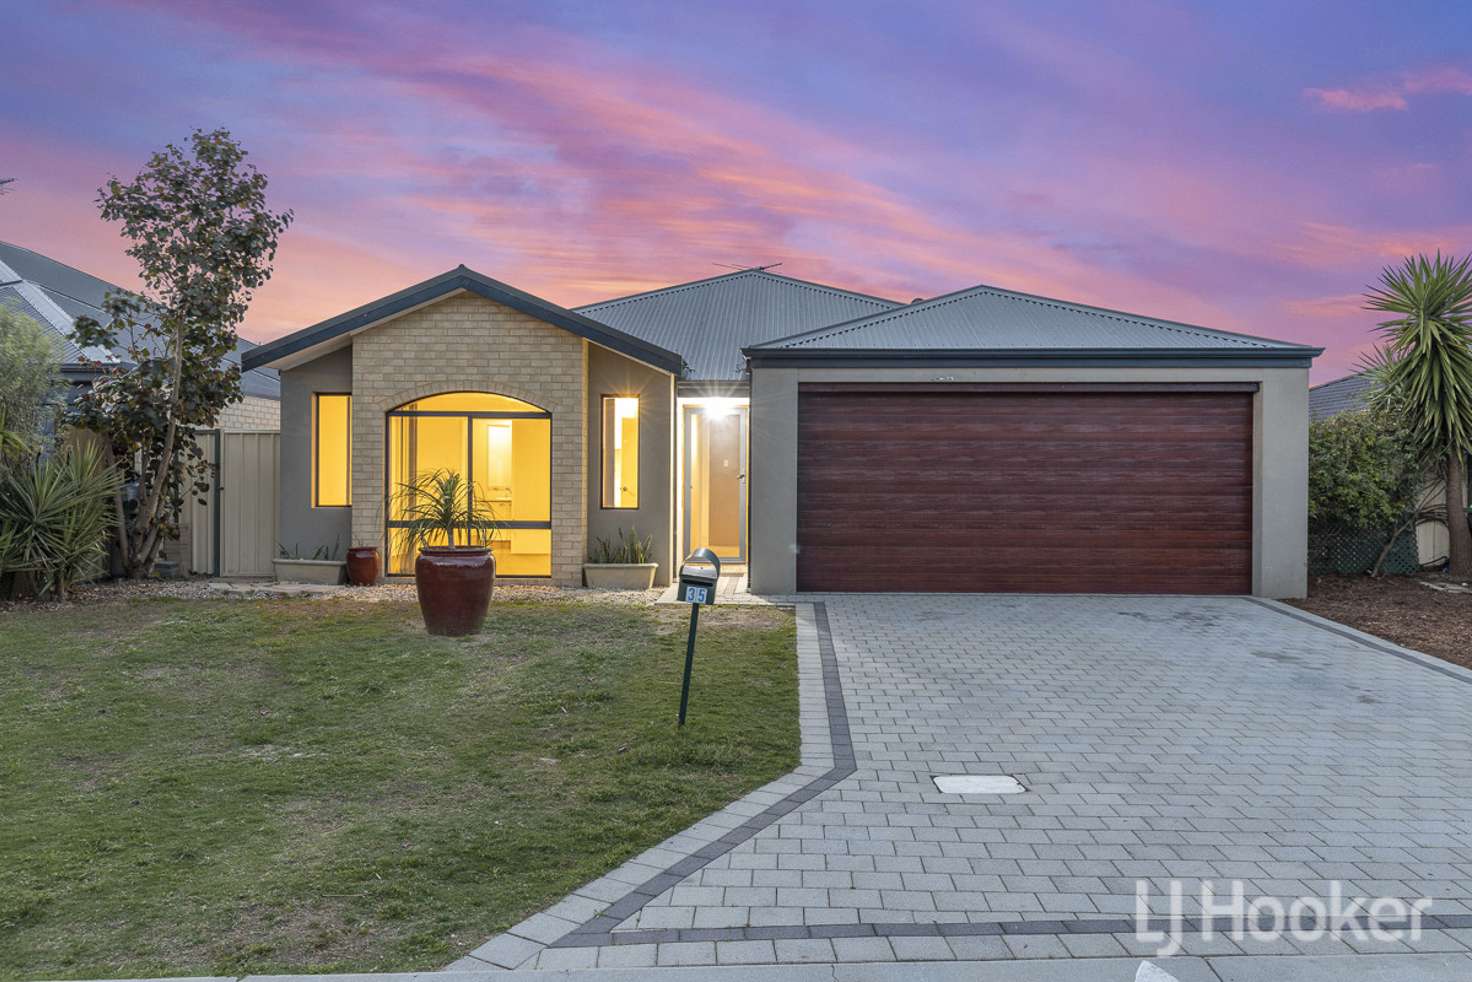 Main view of Homely house listing, 35 Grampians Loop, Yanchep WA 6035